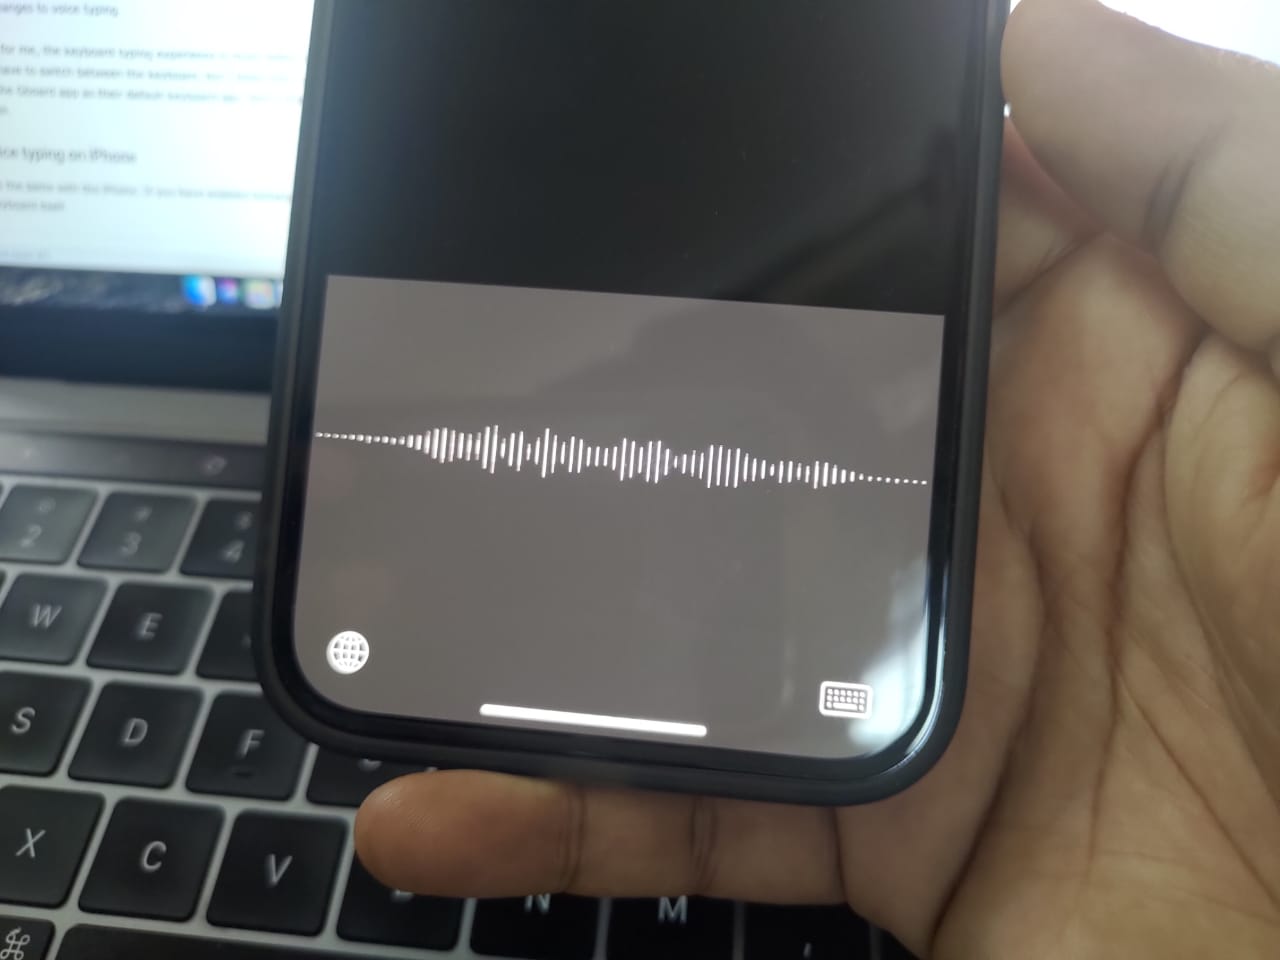 Voice typing on iPhone